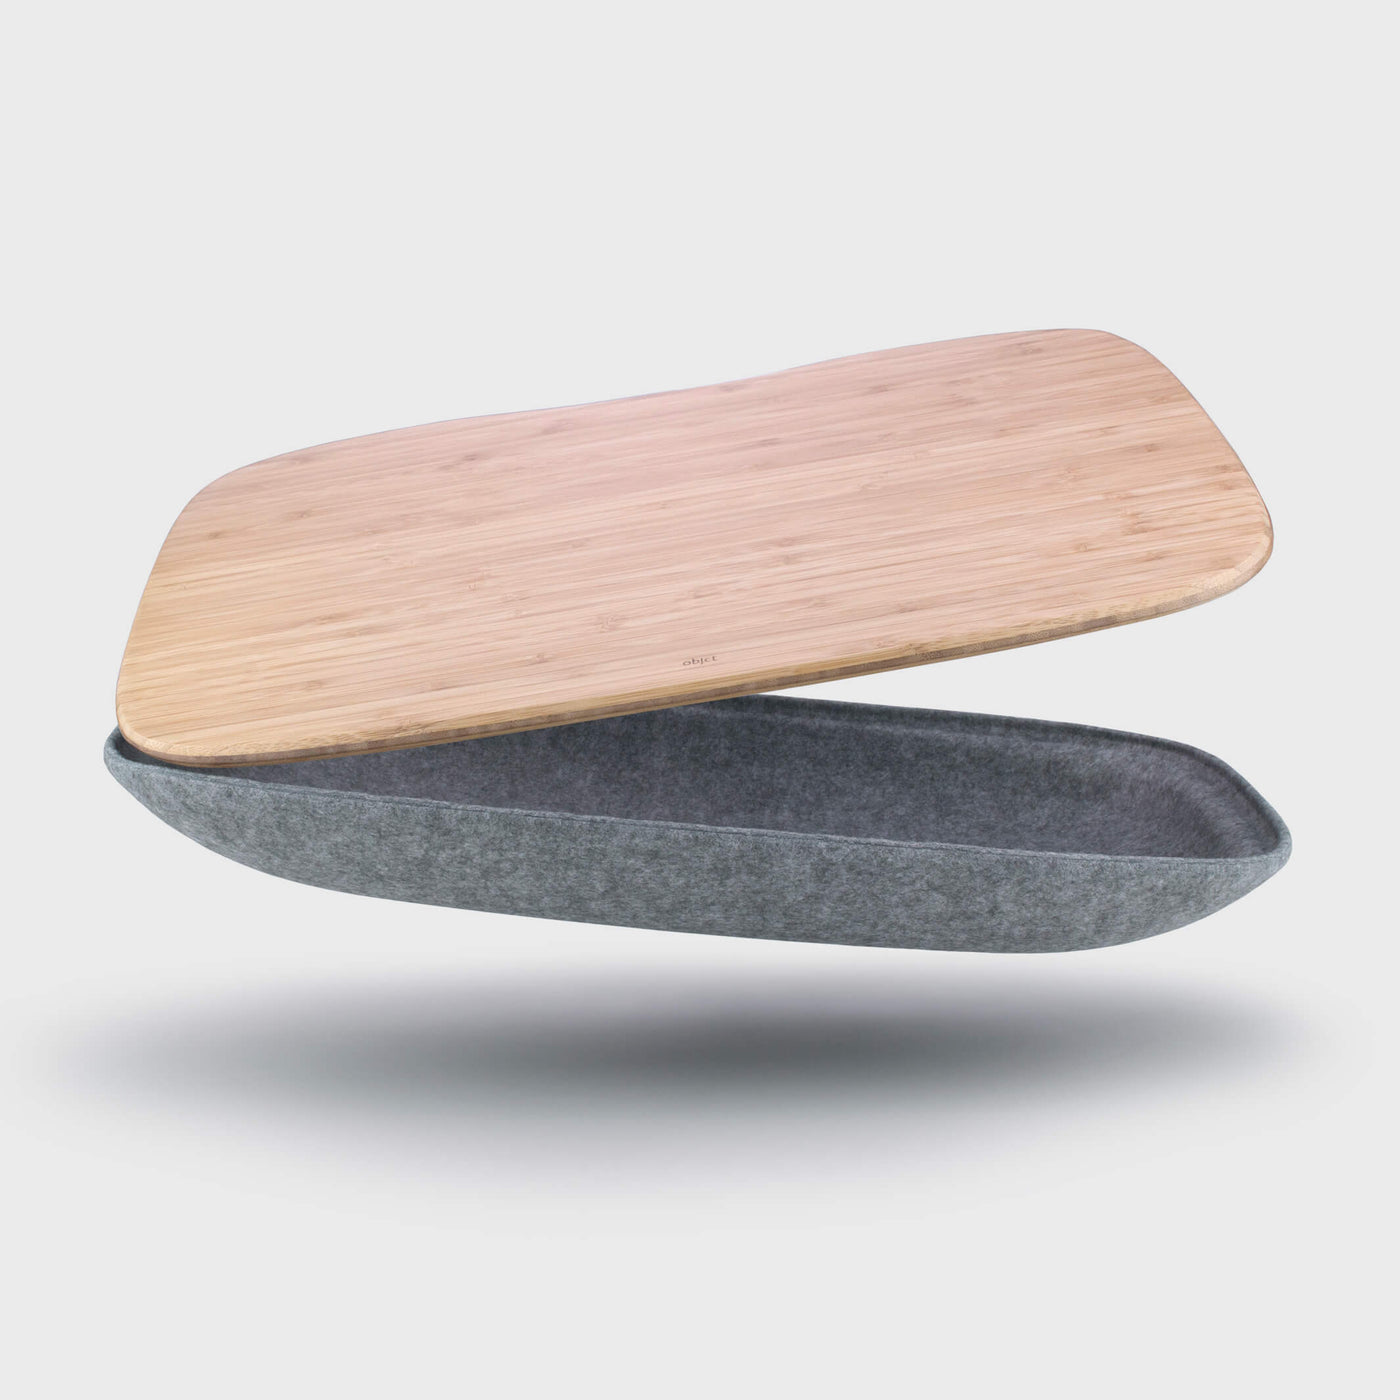 Lapod Lap Desk with Storage by Objct Co in Ash Grey. Cushioned felt, bamboo tray lap tray organiser for home or office use.